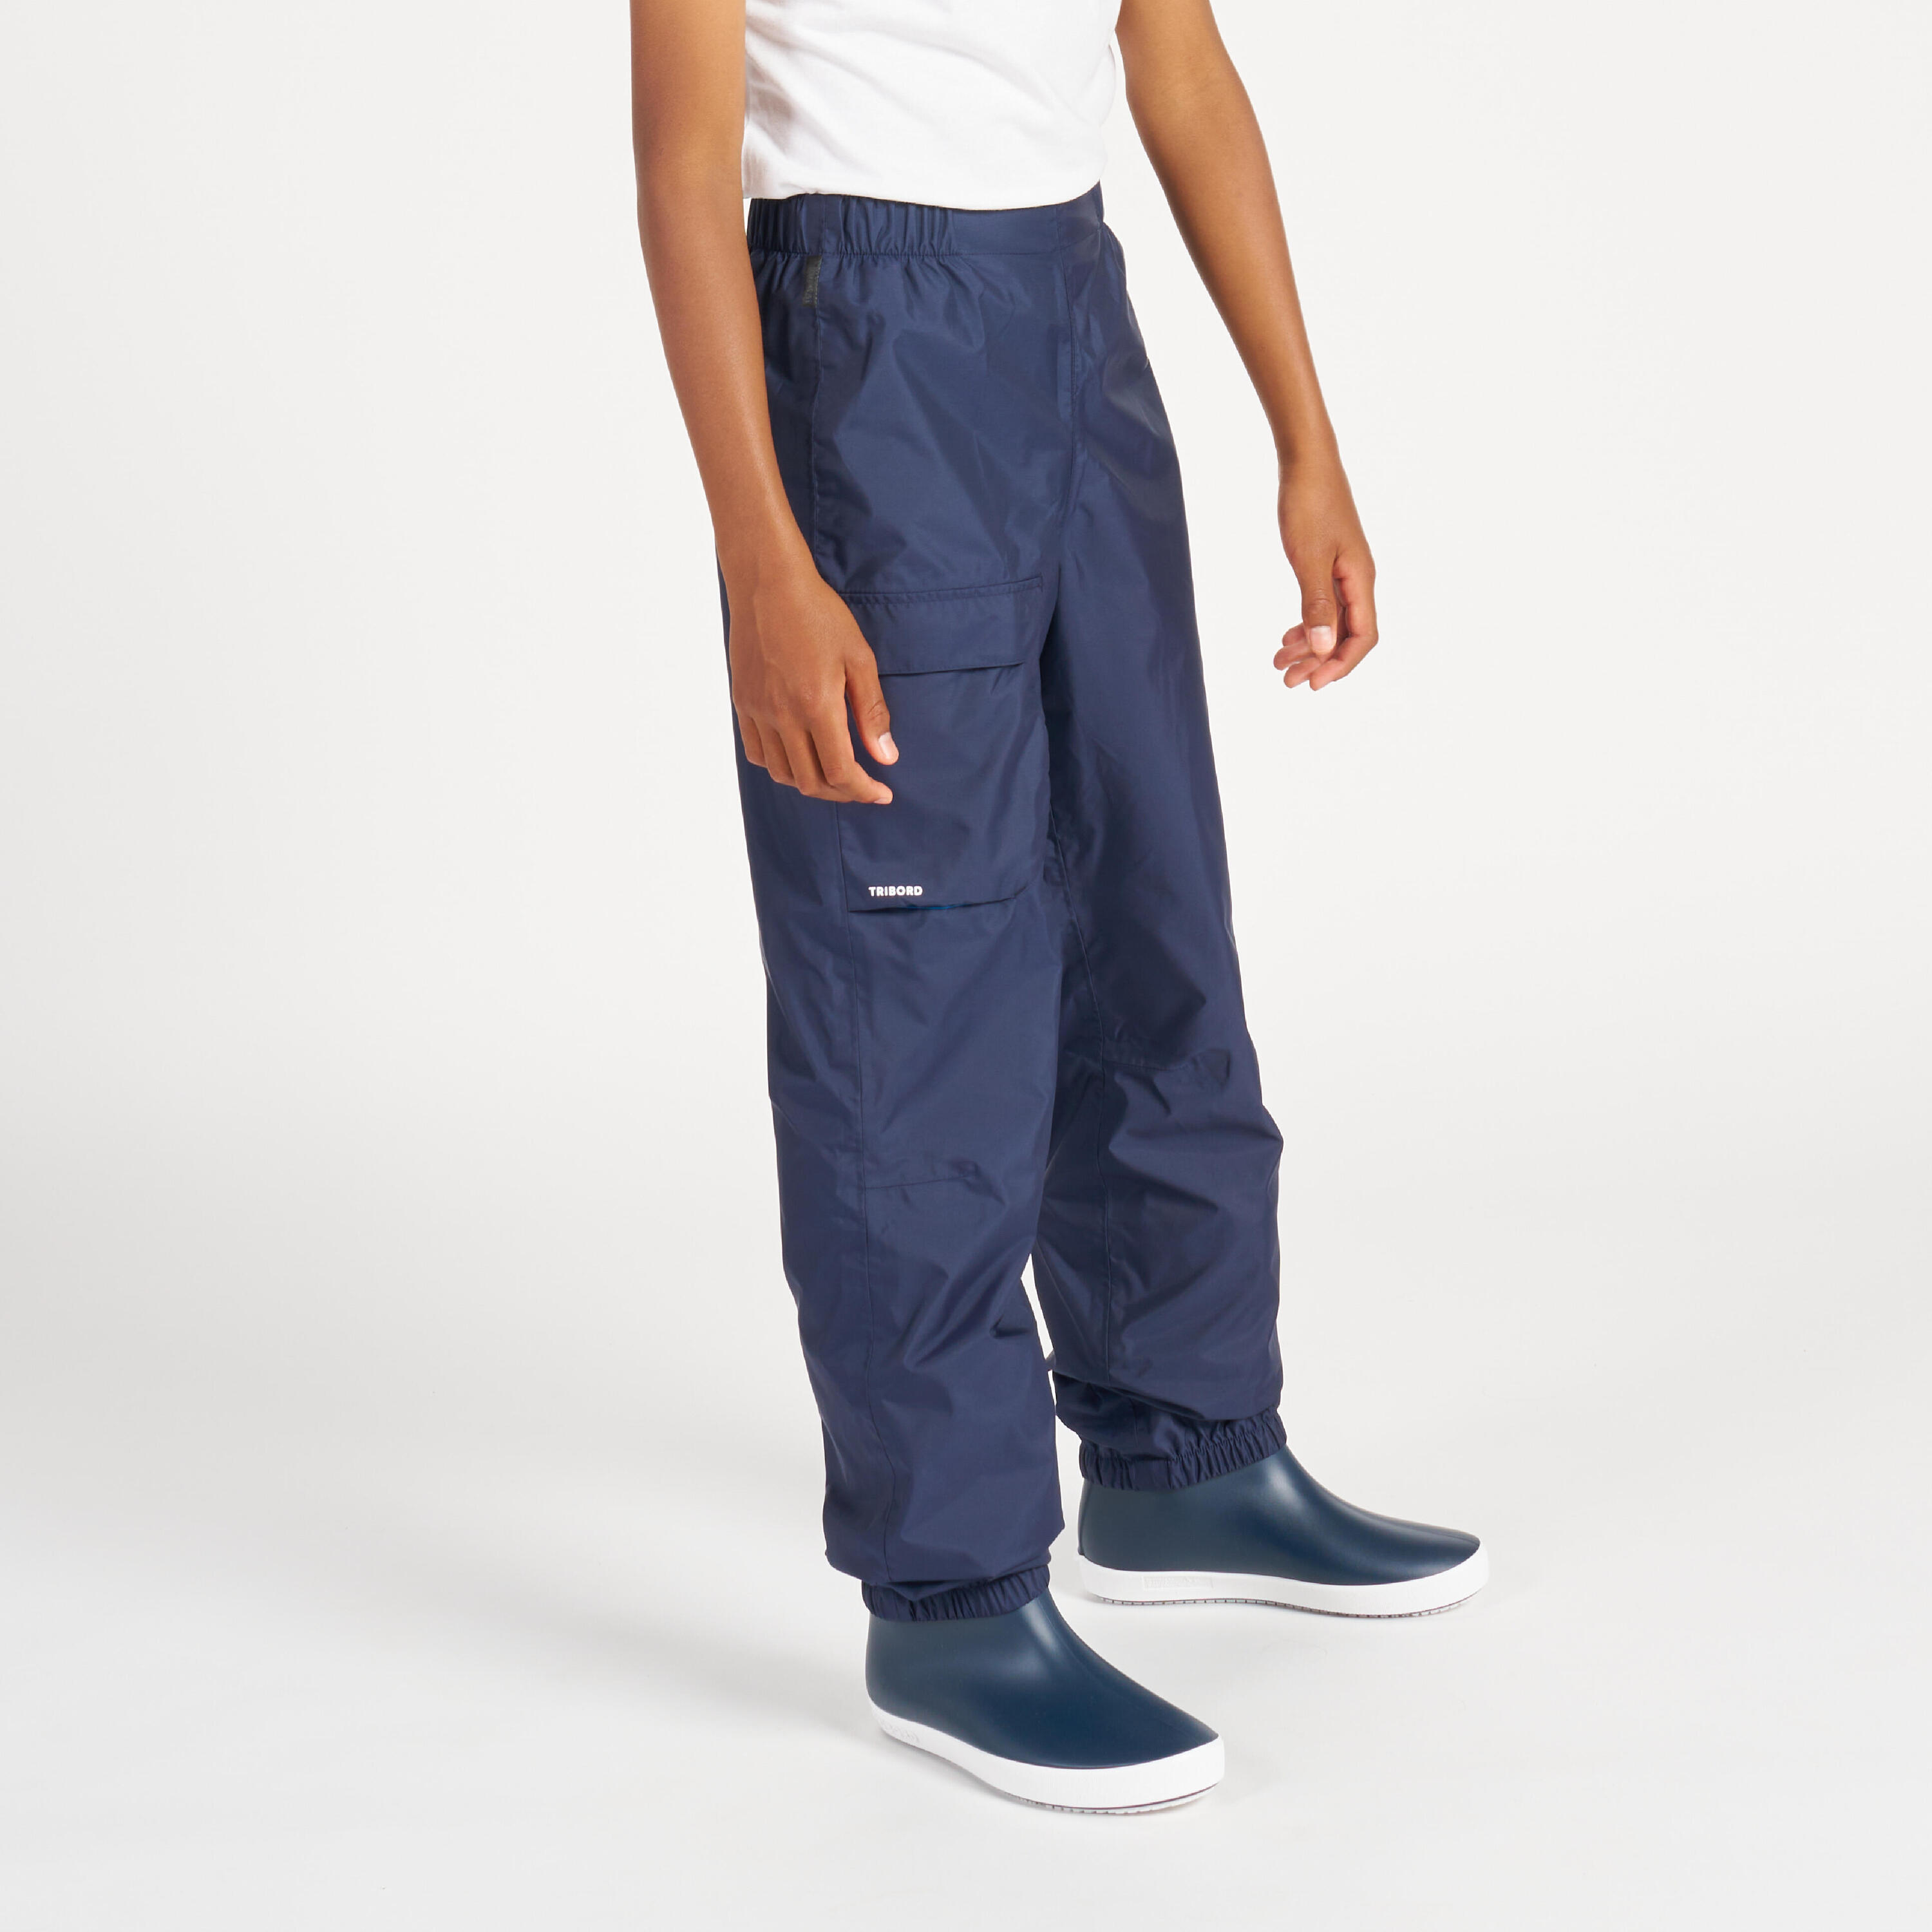 Kids' Overtrousers Sailing 100 Navy blue 3/15